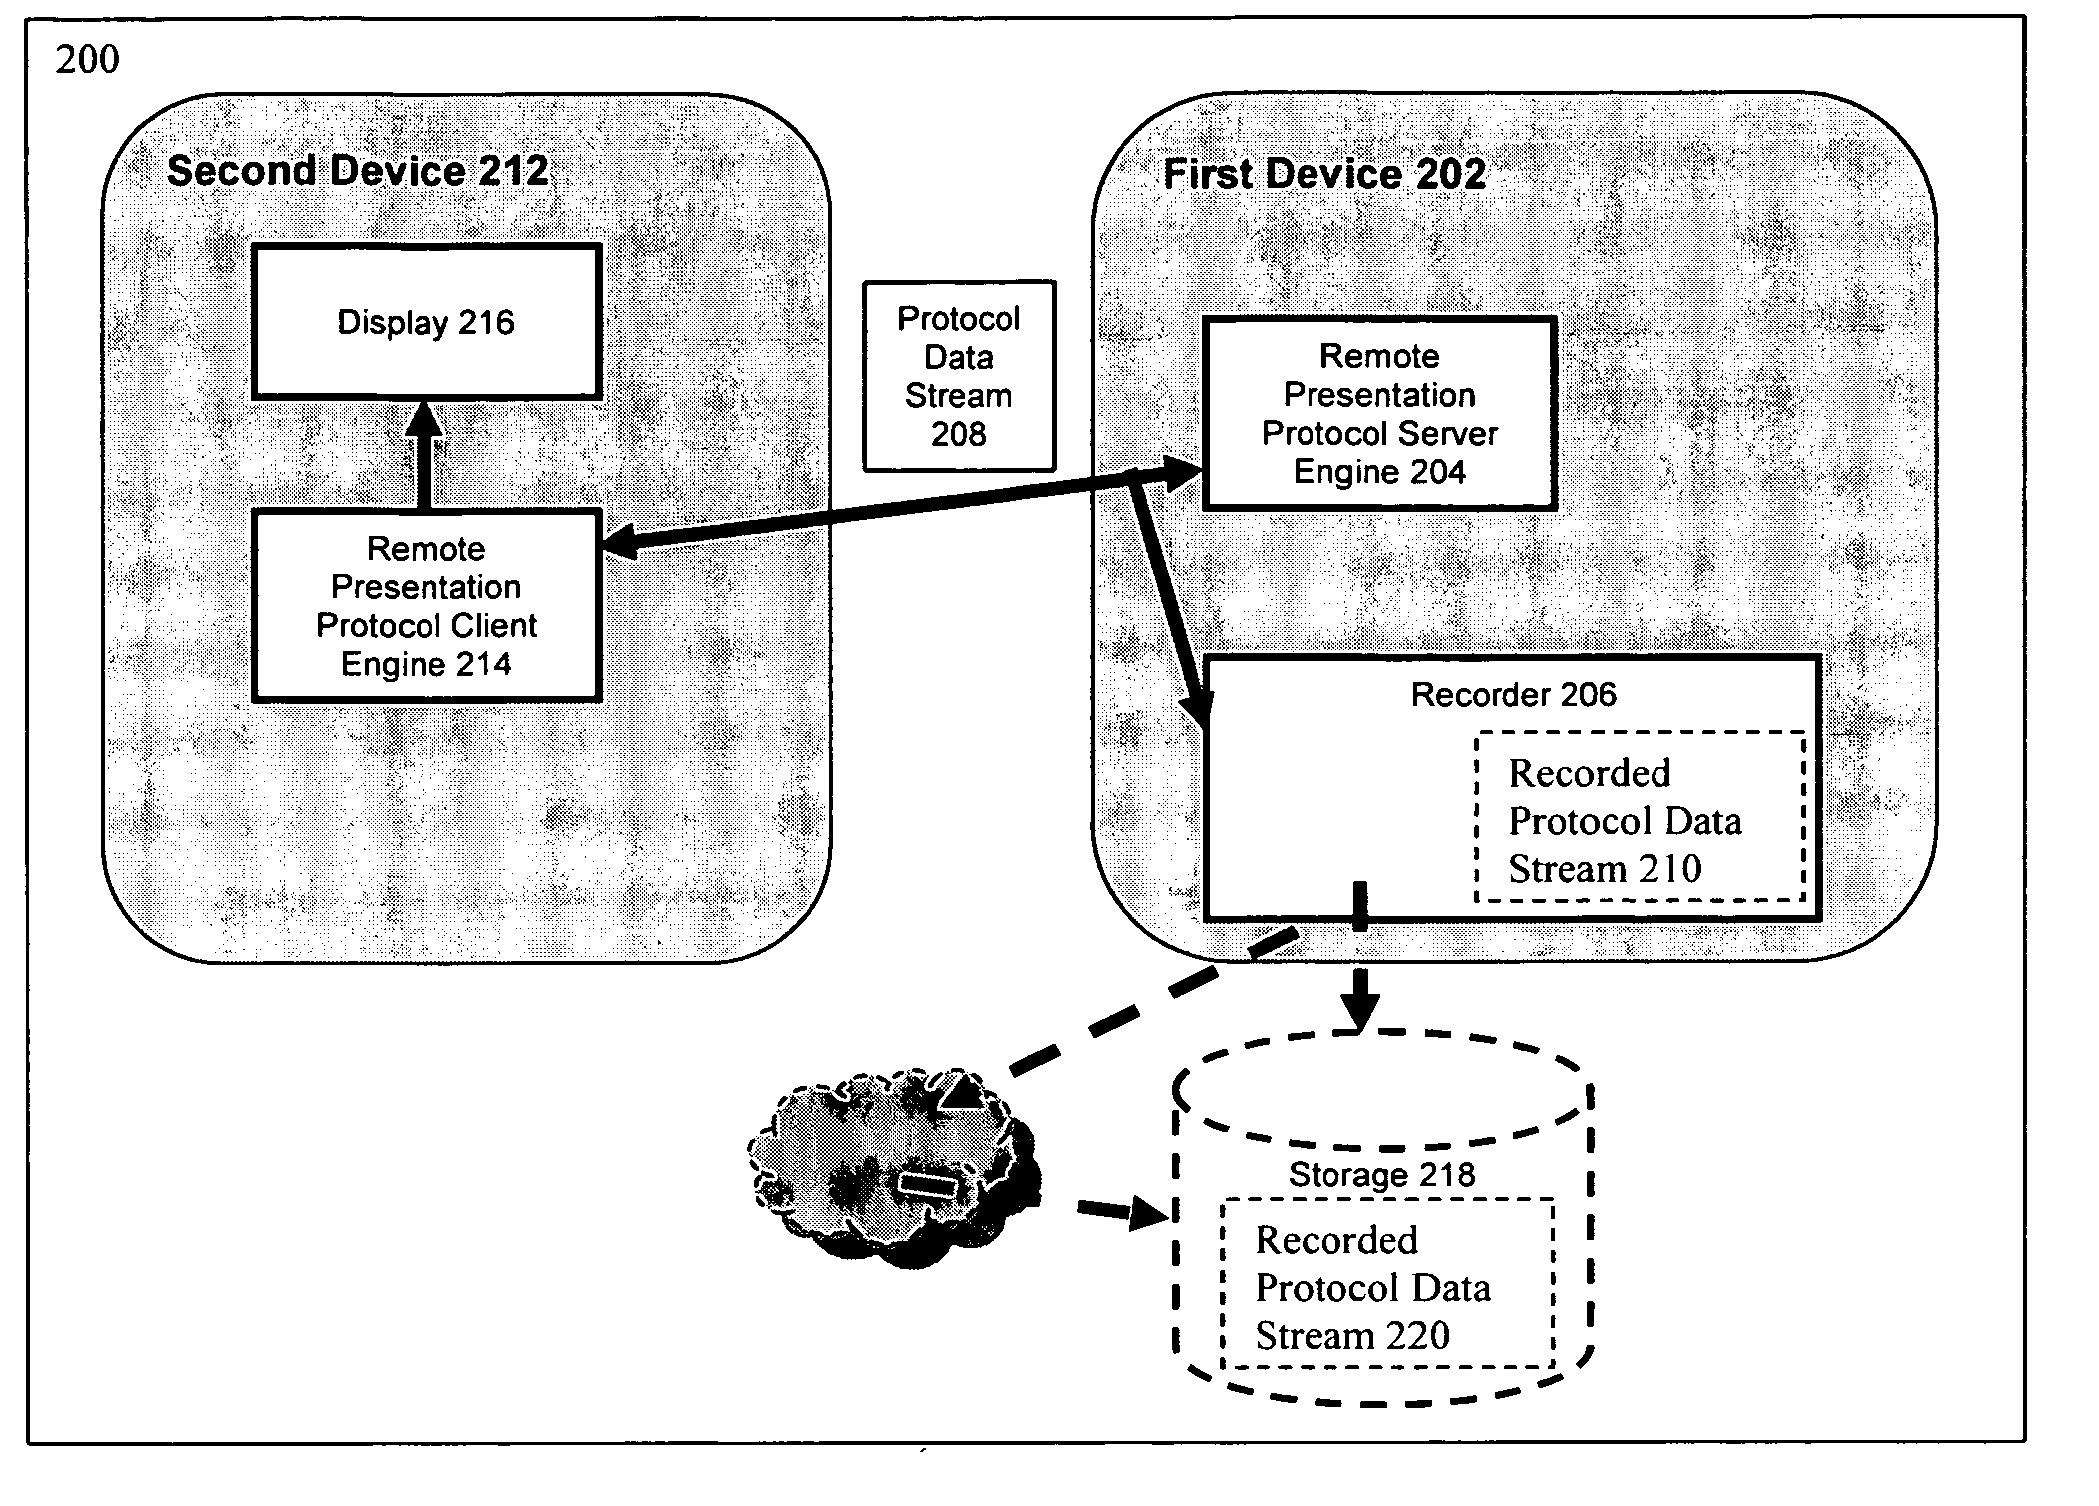 Method and systems for capture and replay of remote presentation protocol data